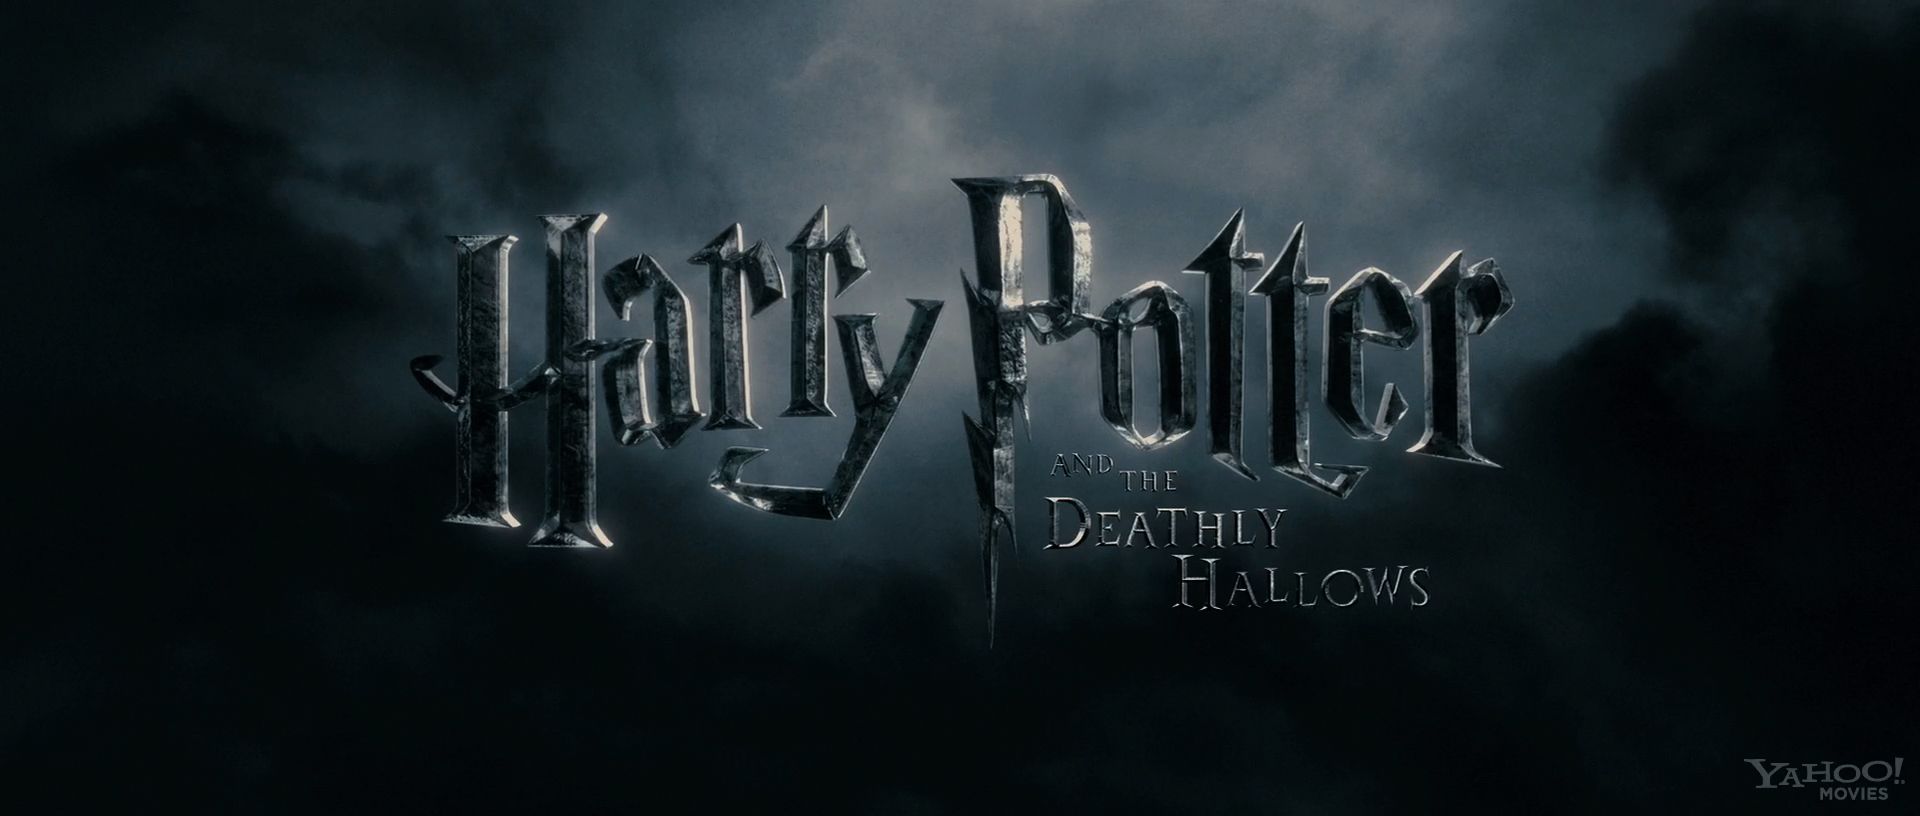 Harry Potter and the Deathly Hallow Trailer Still #1